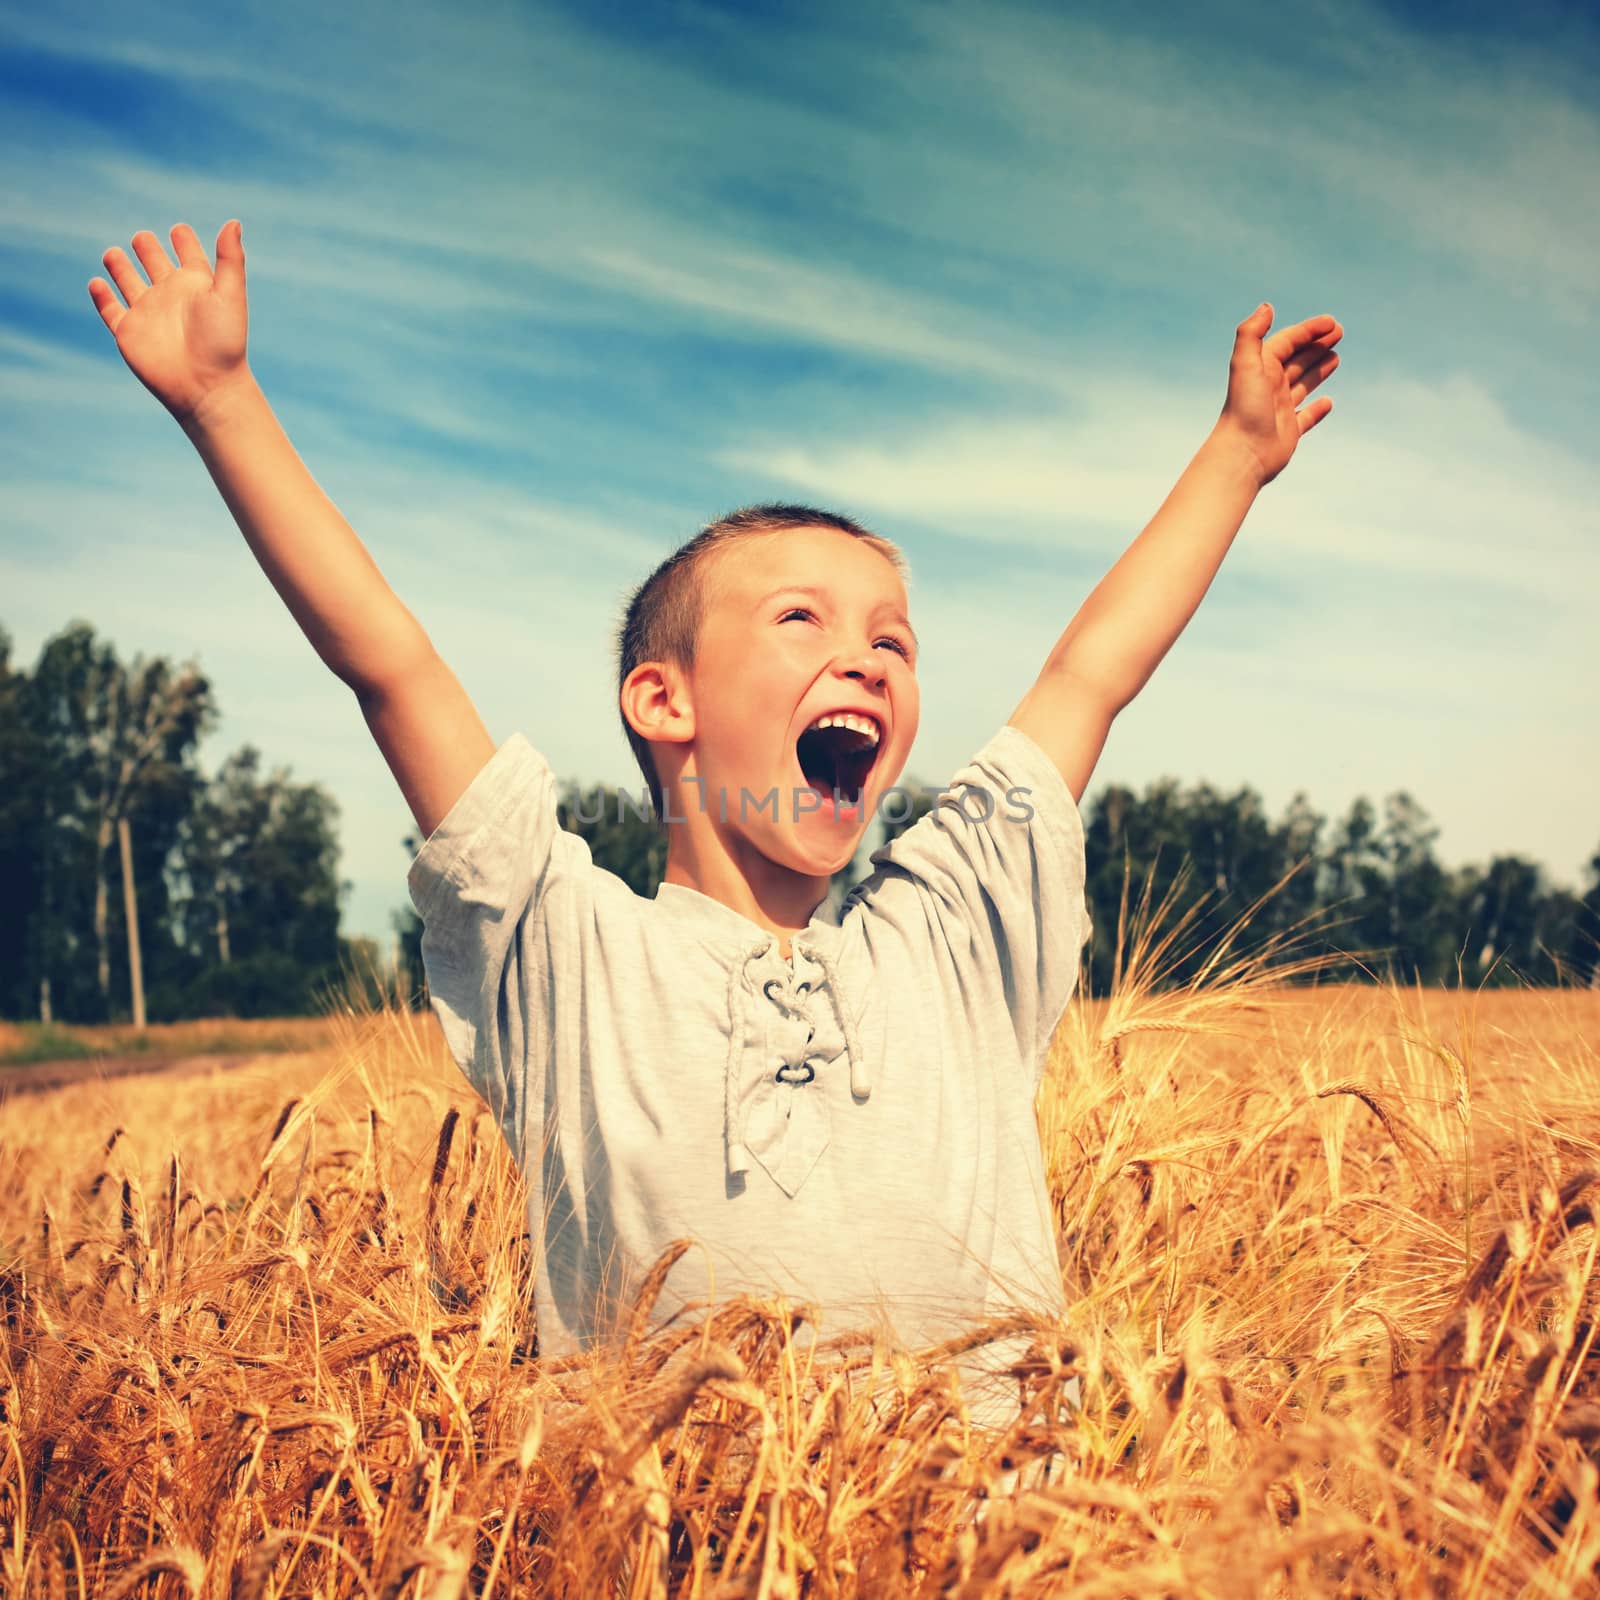 Vintage photo of Happy Kid in the Wheat Field